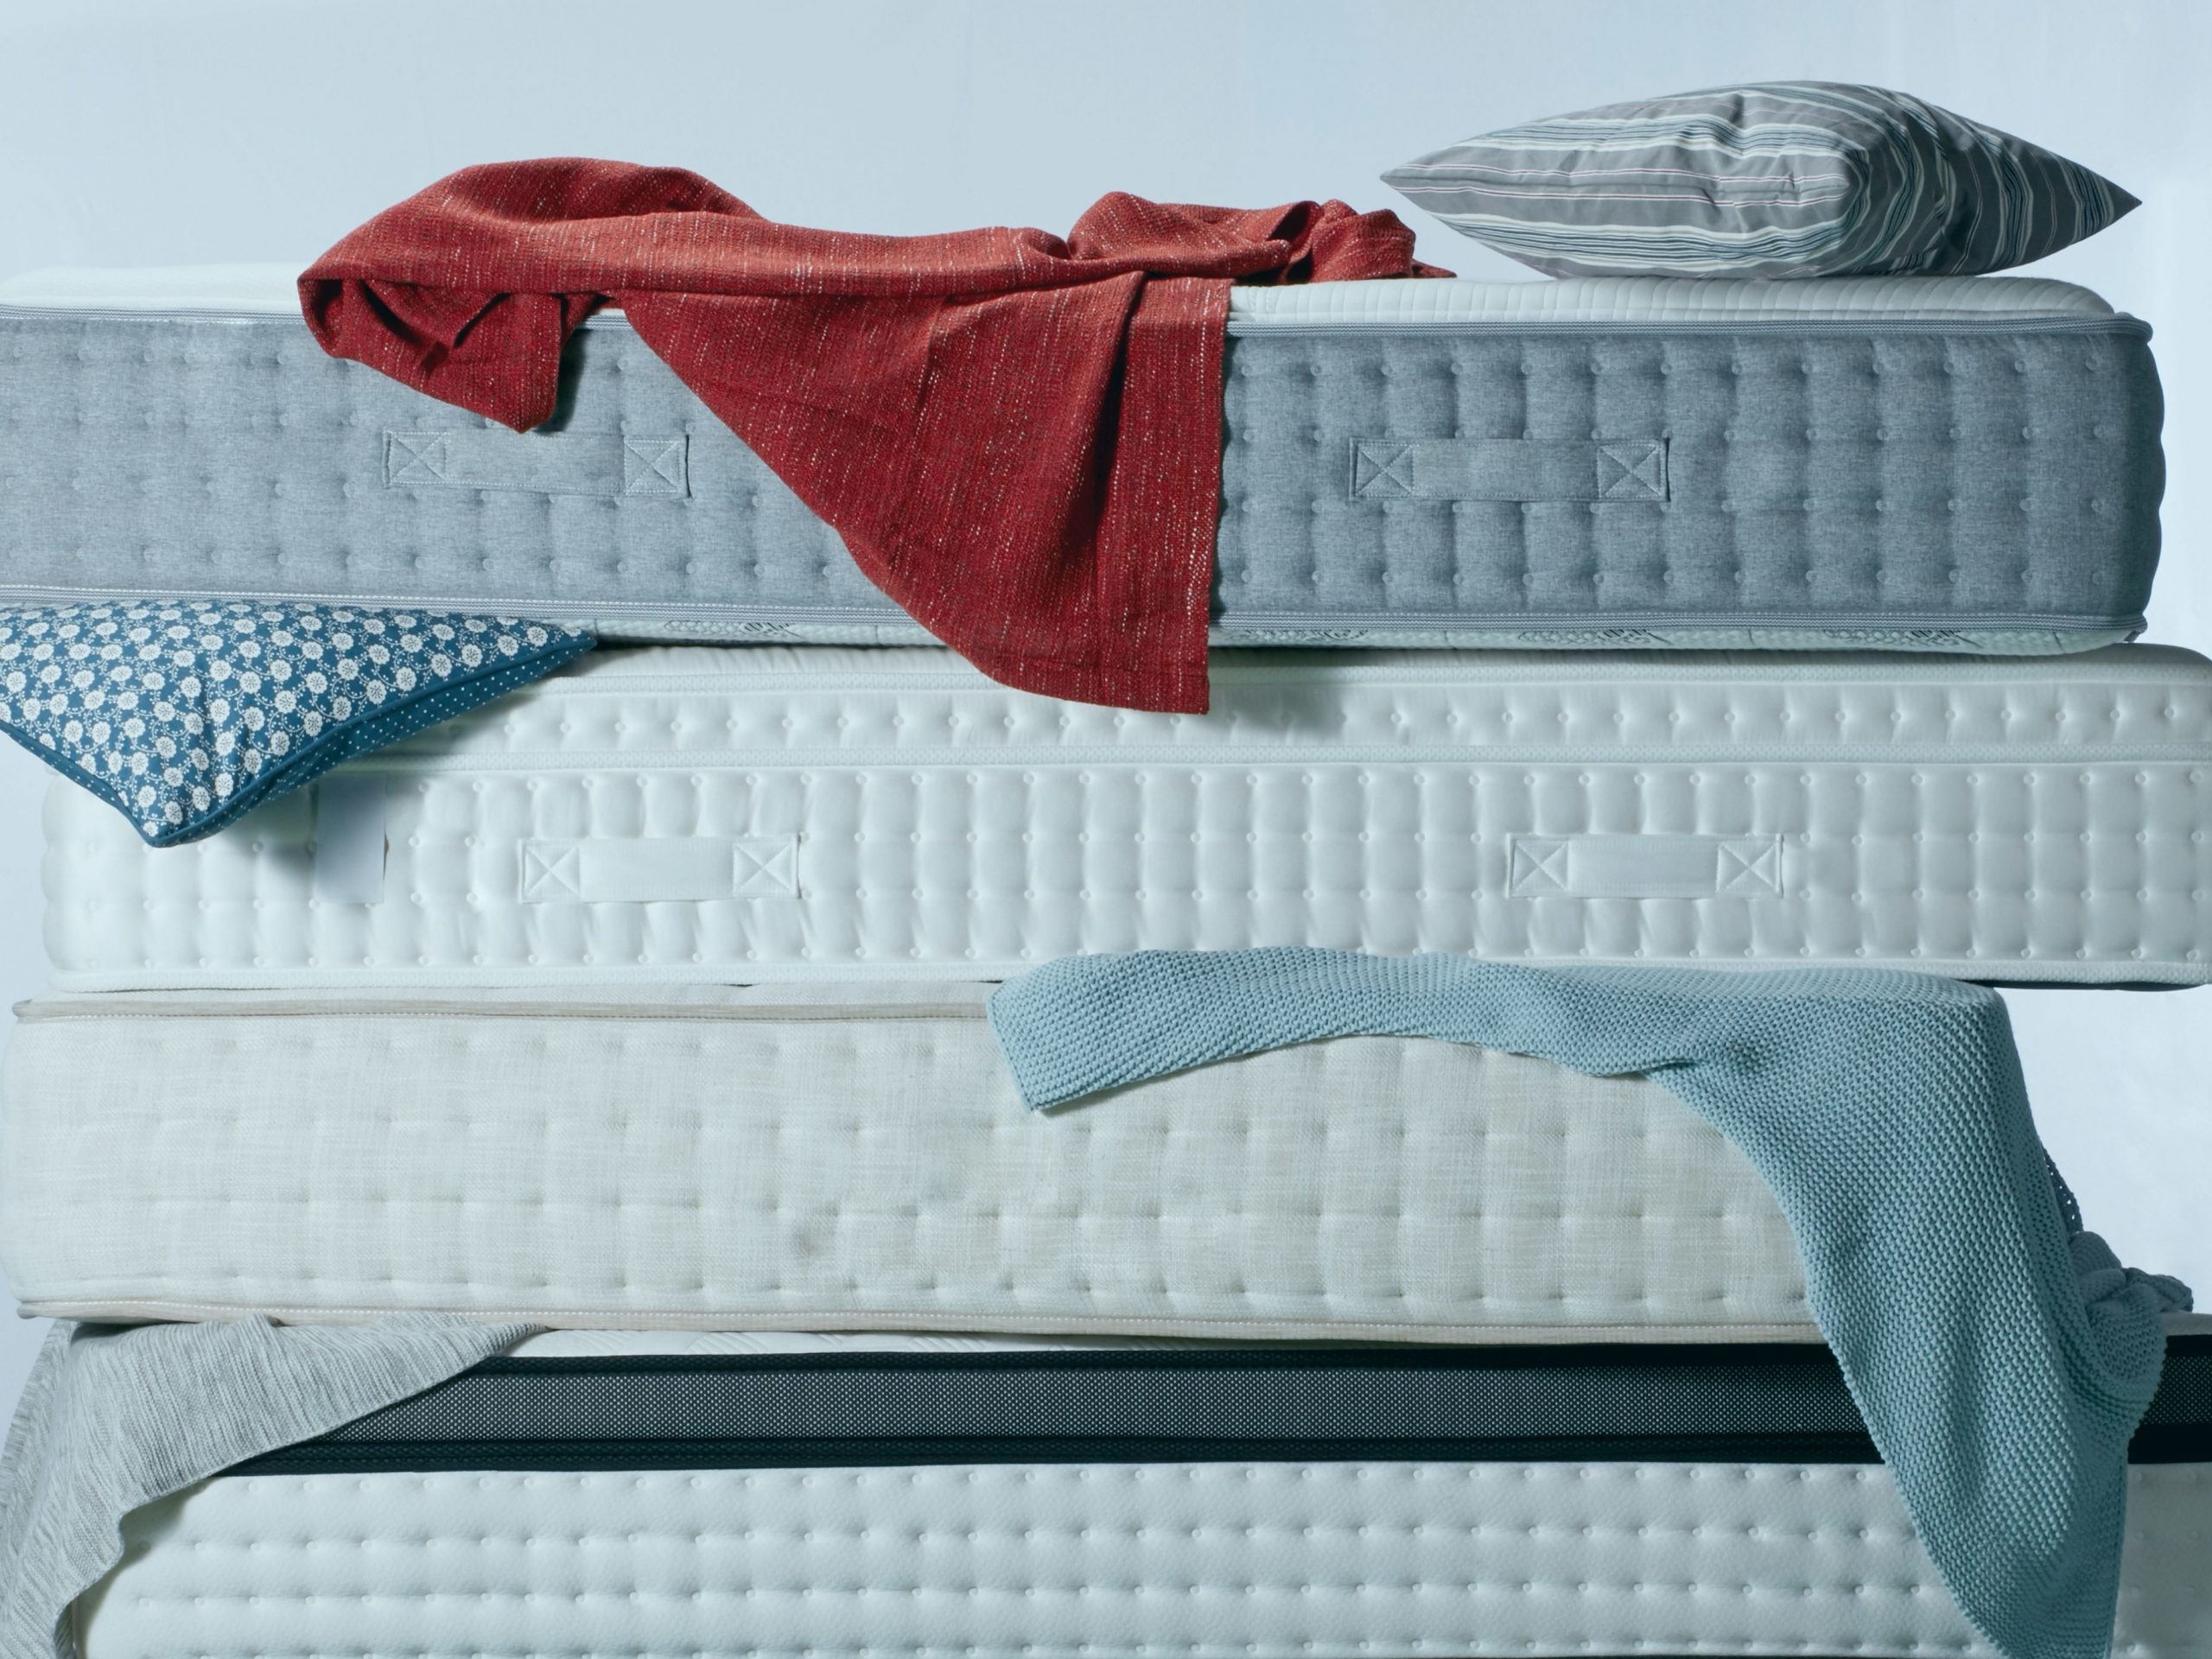 can a new mattress help with back pain